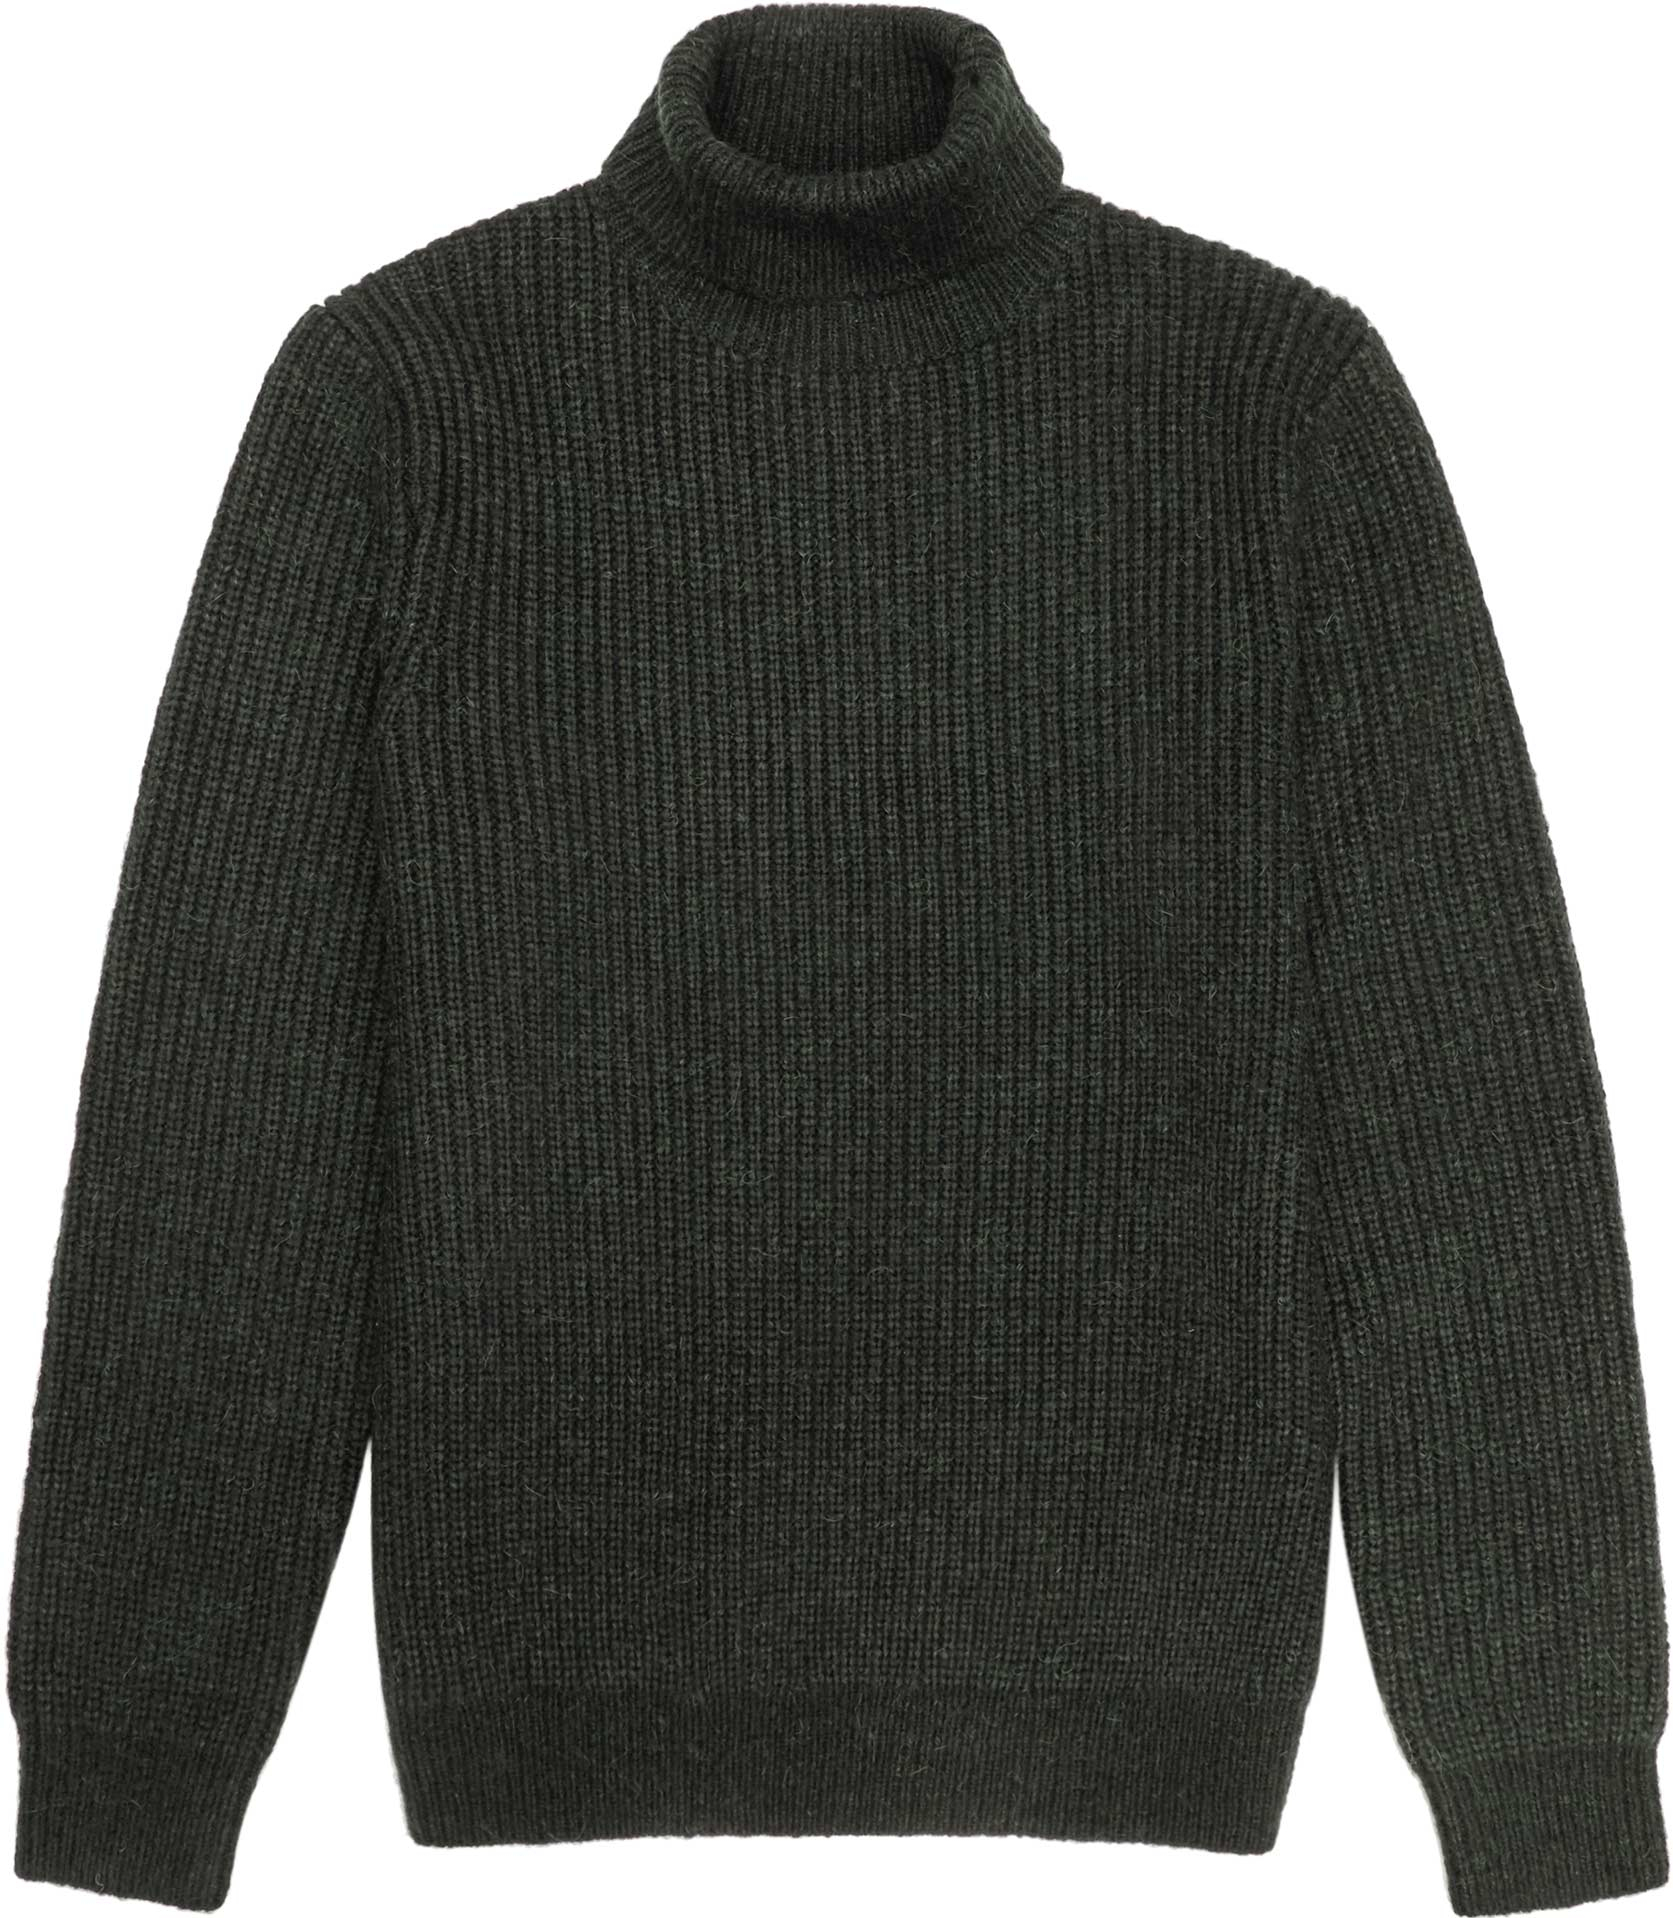 Lyst - Reiss Alfred Ribbed Rollneck Jumper in Green for Men